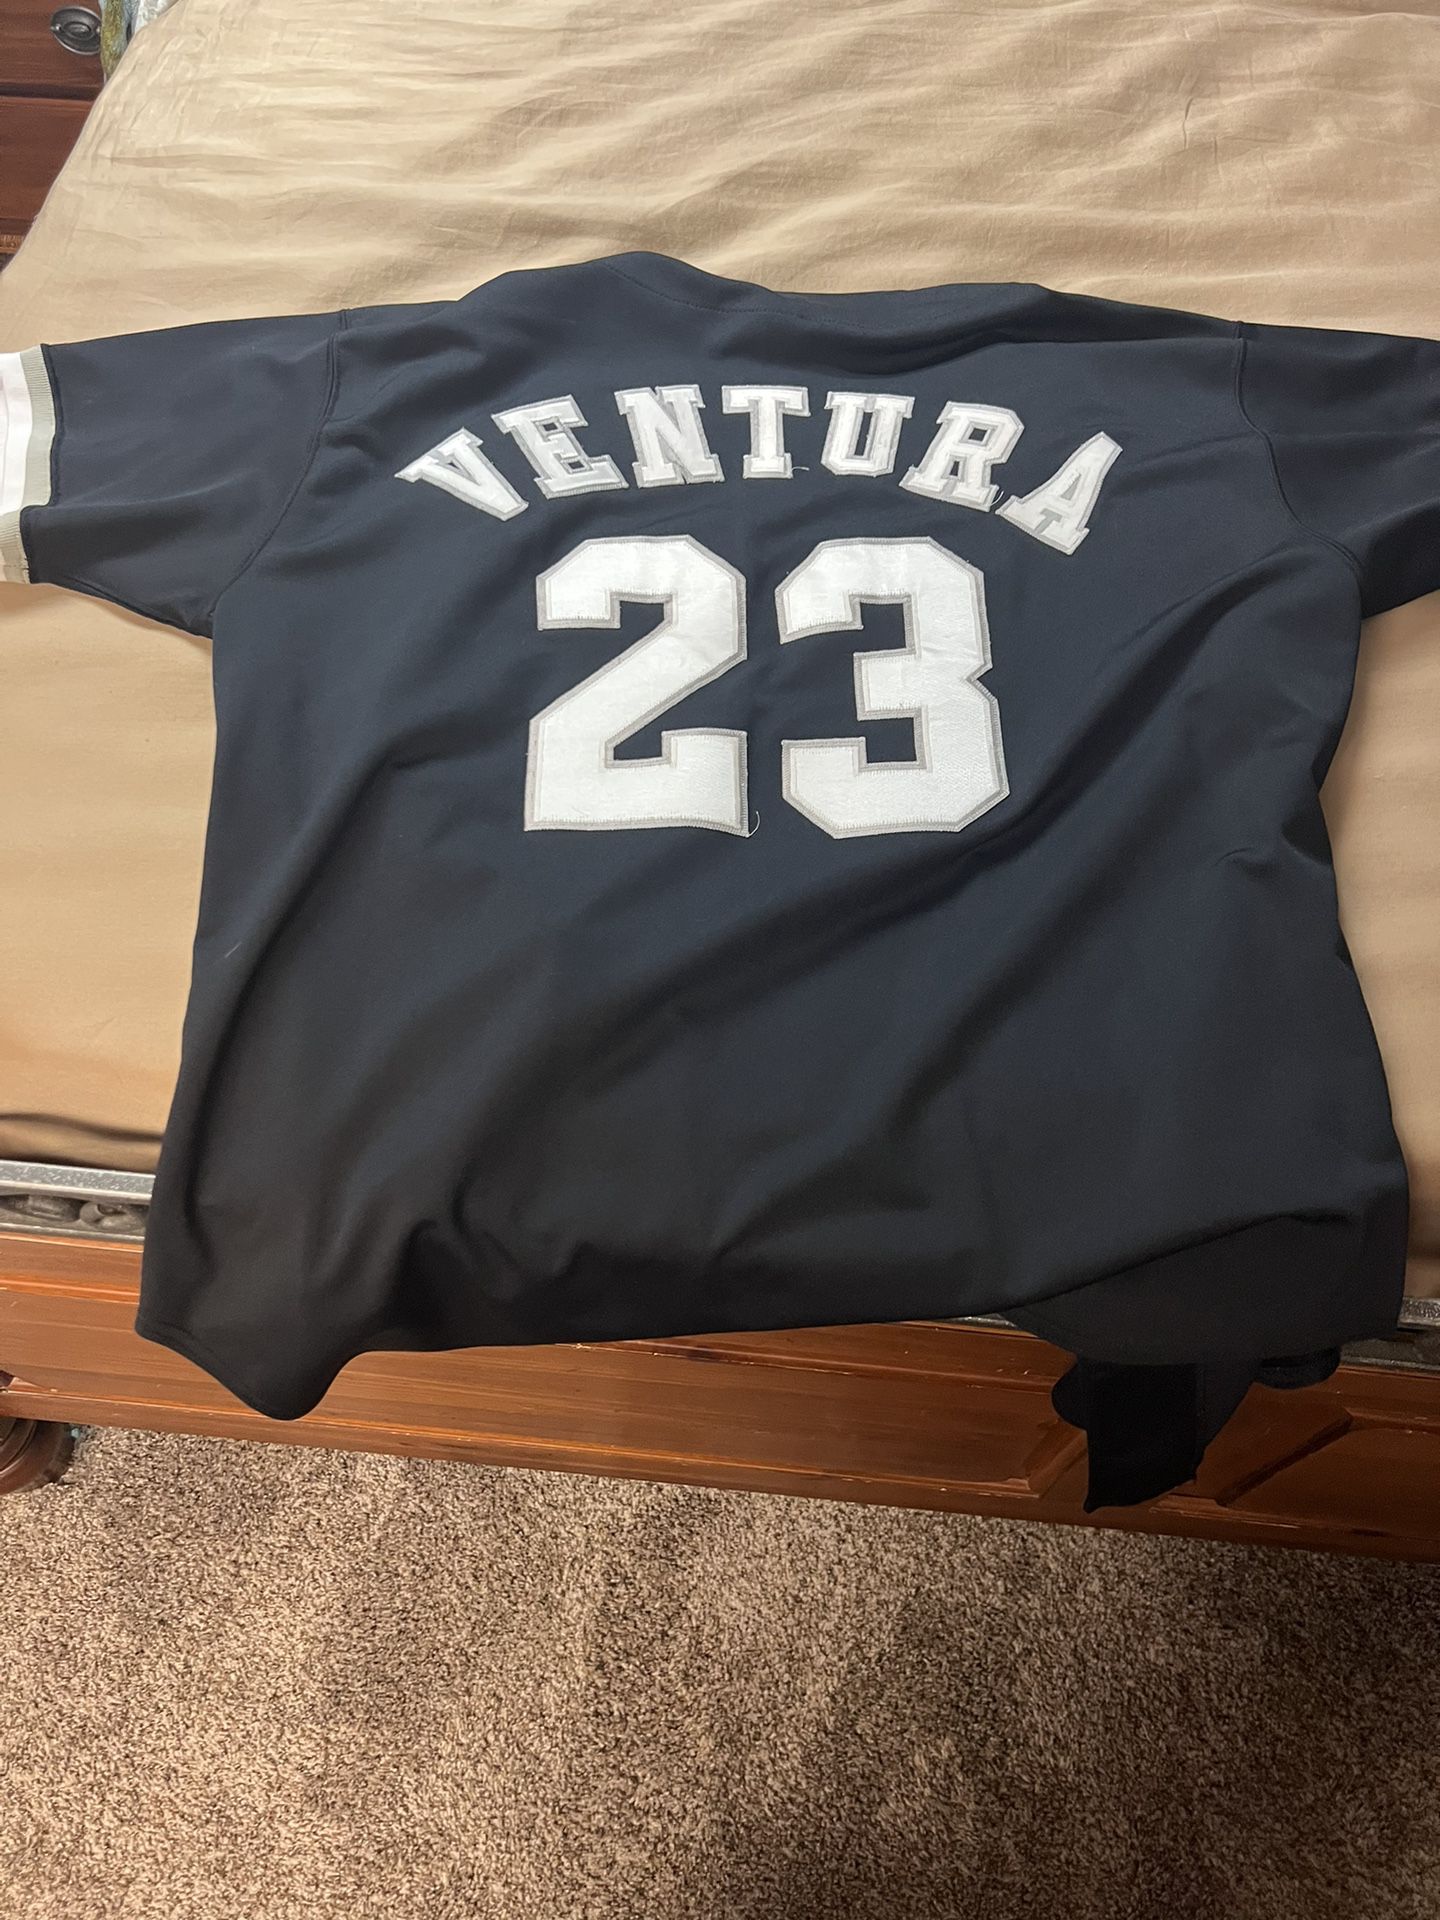 White Sox Ventura Jersey - Size 52 for Sale in Plainfield, IL - OfferUp